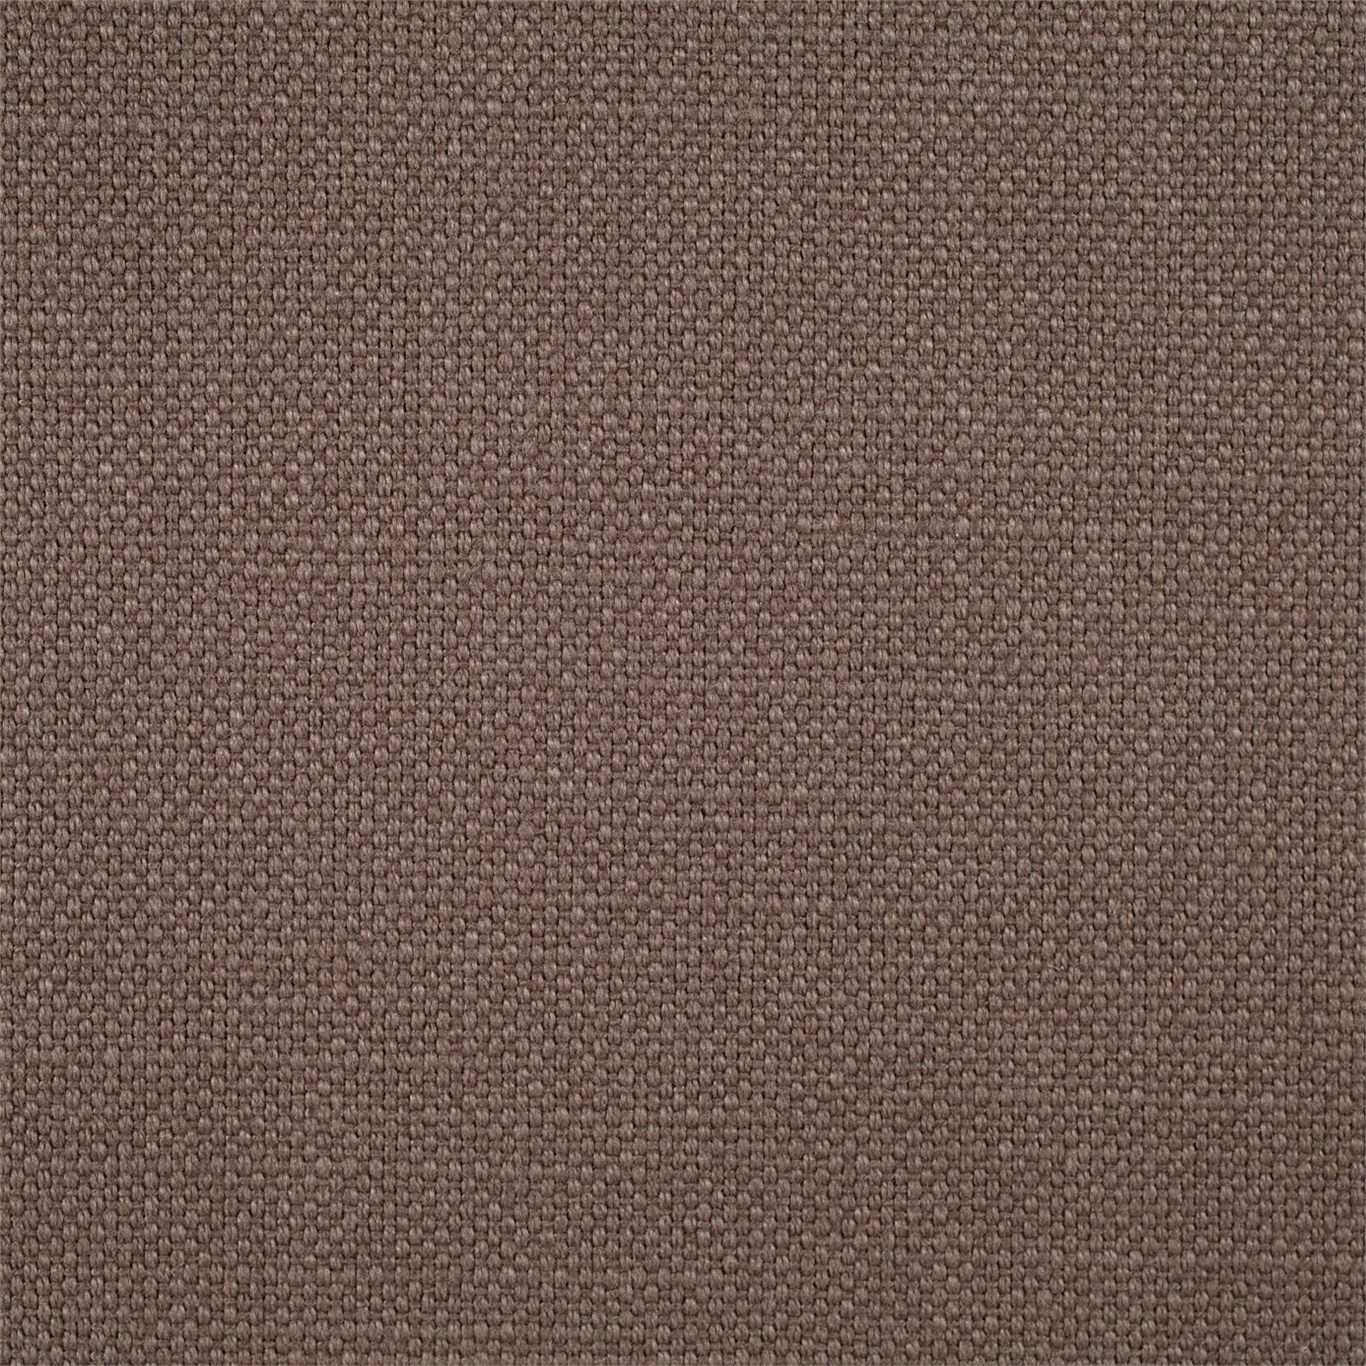 Arley Charcoal Fabric by SAN